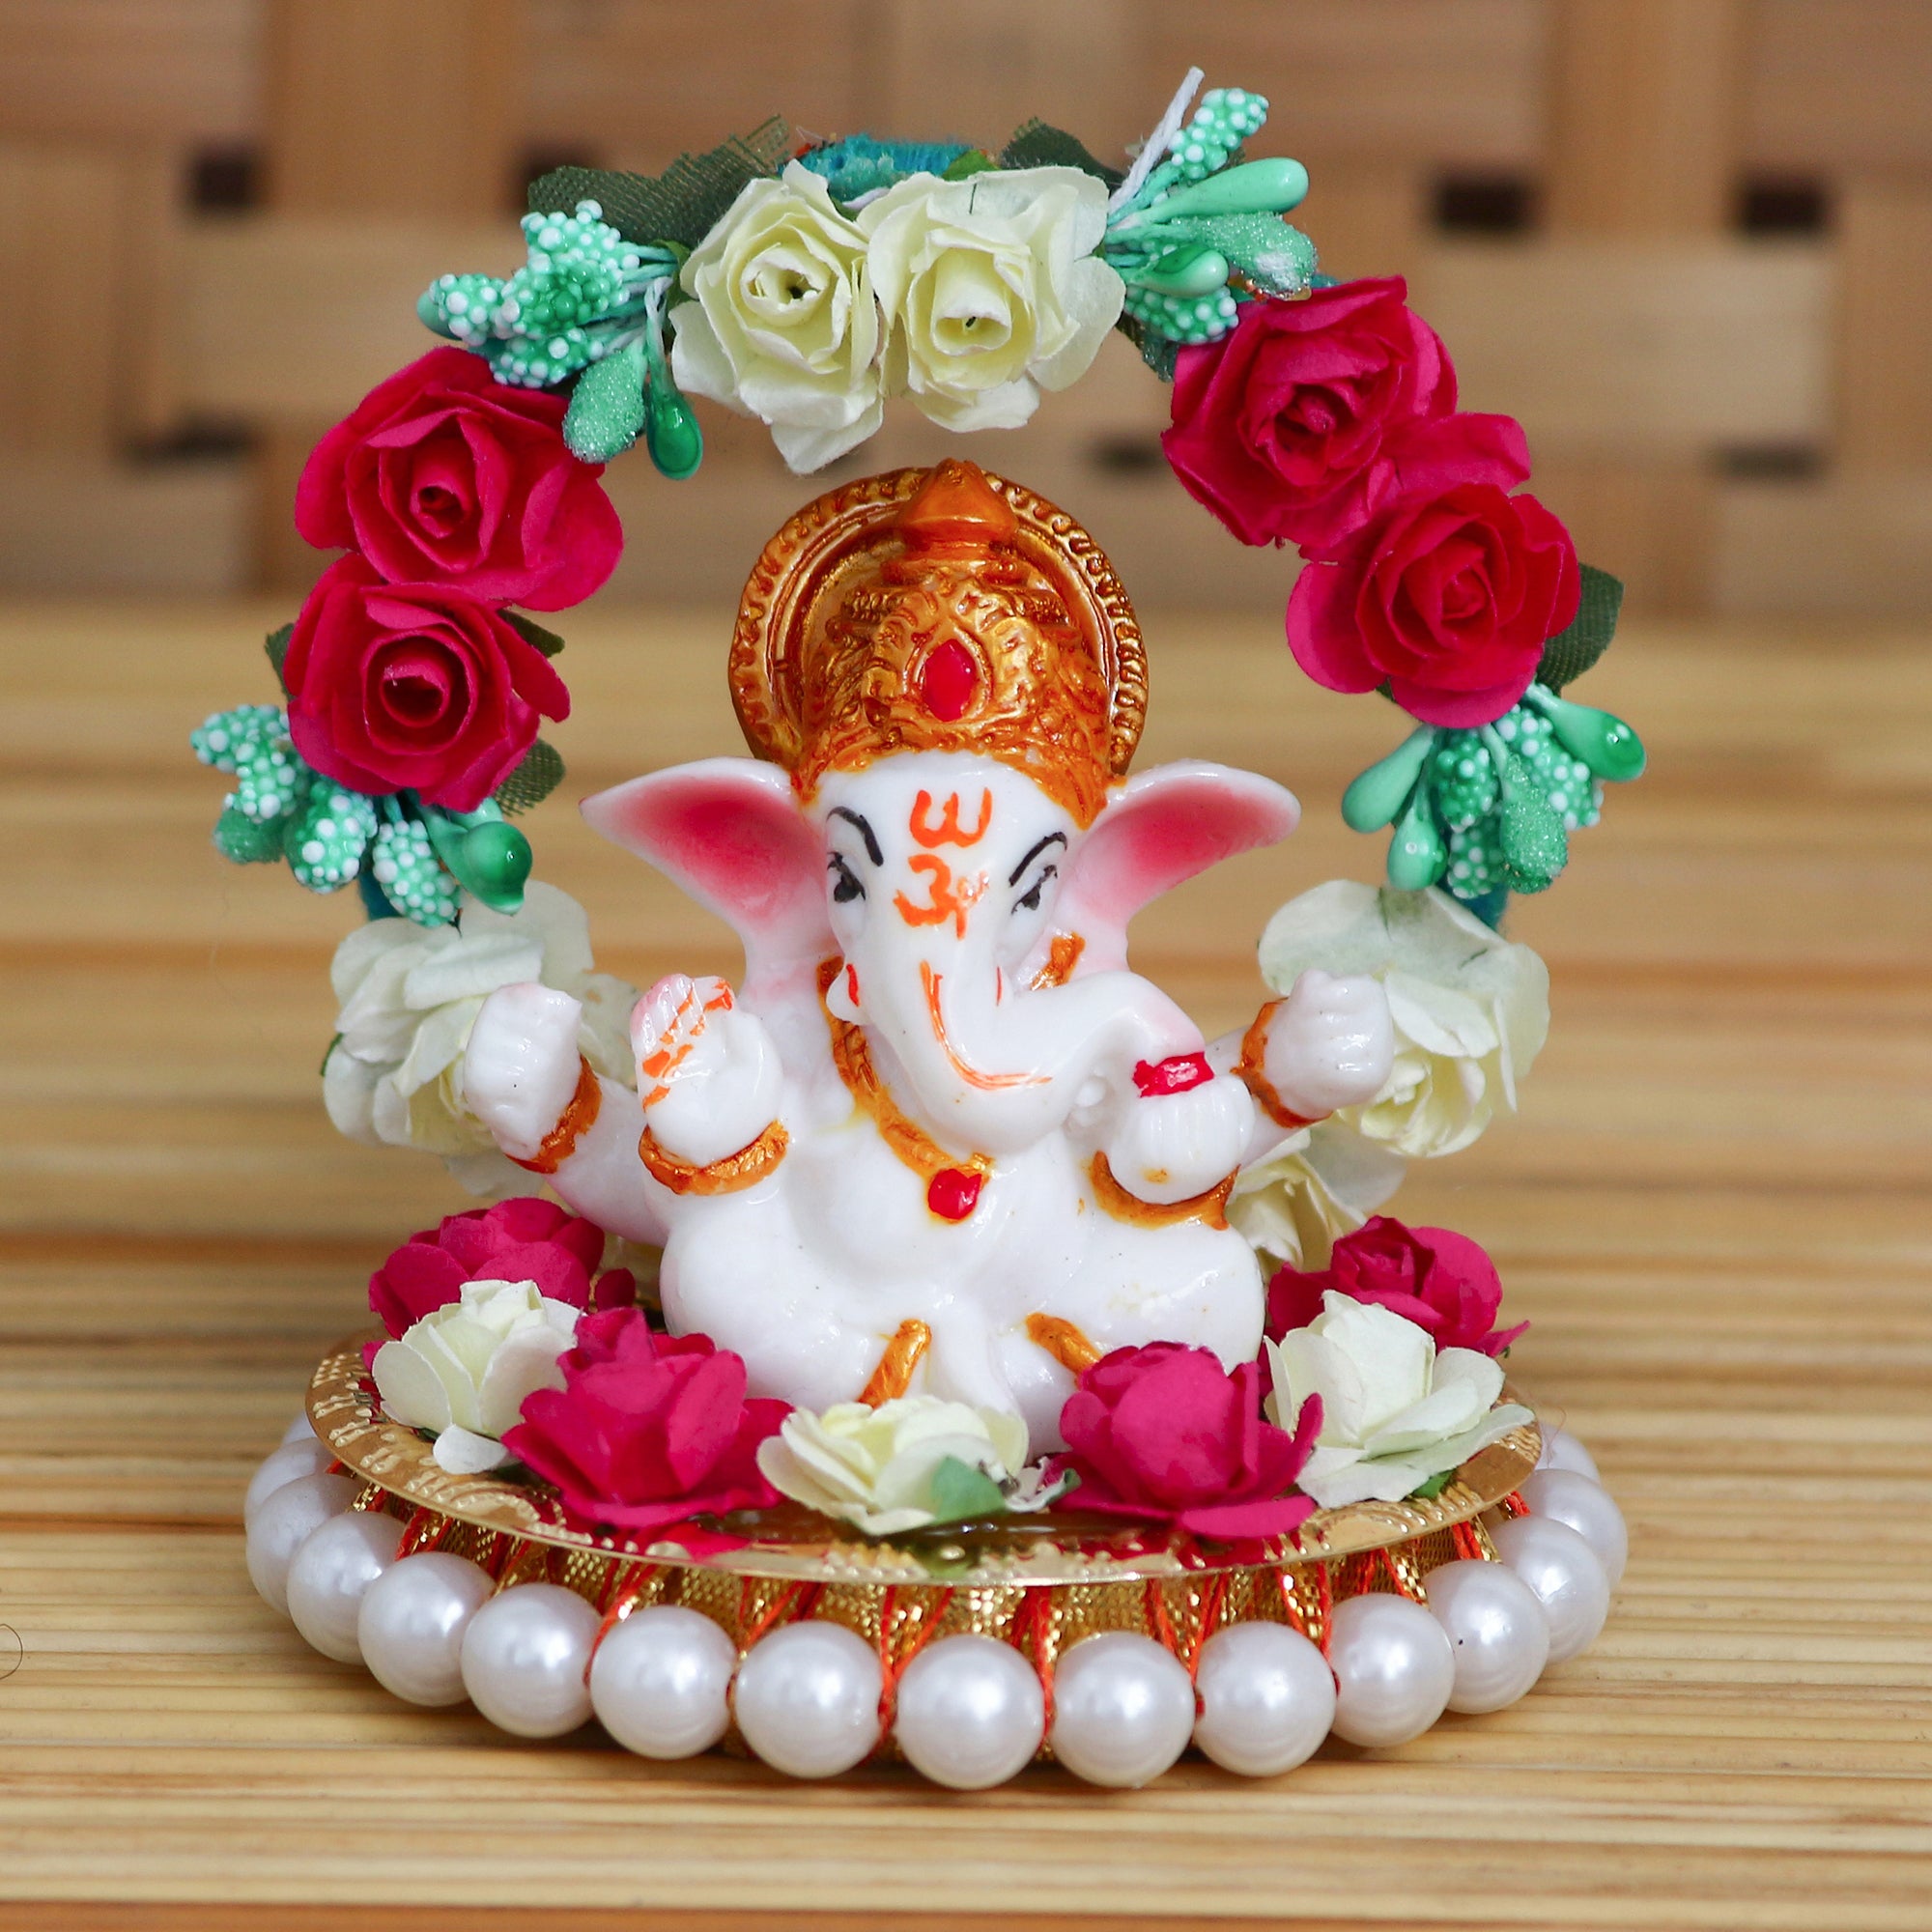 Polyresin Lord Ganesha Idol on Decorative Handcrafted Plate with Throne of Colorful Flowers